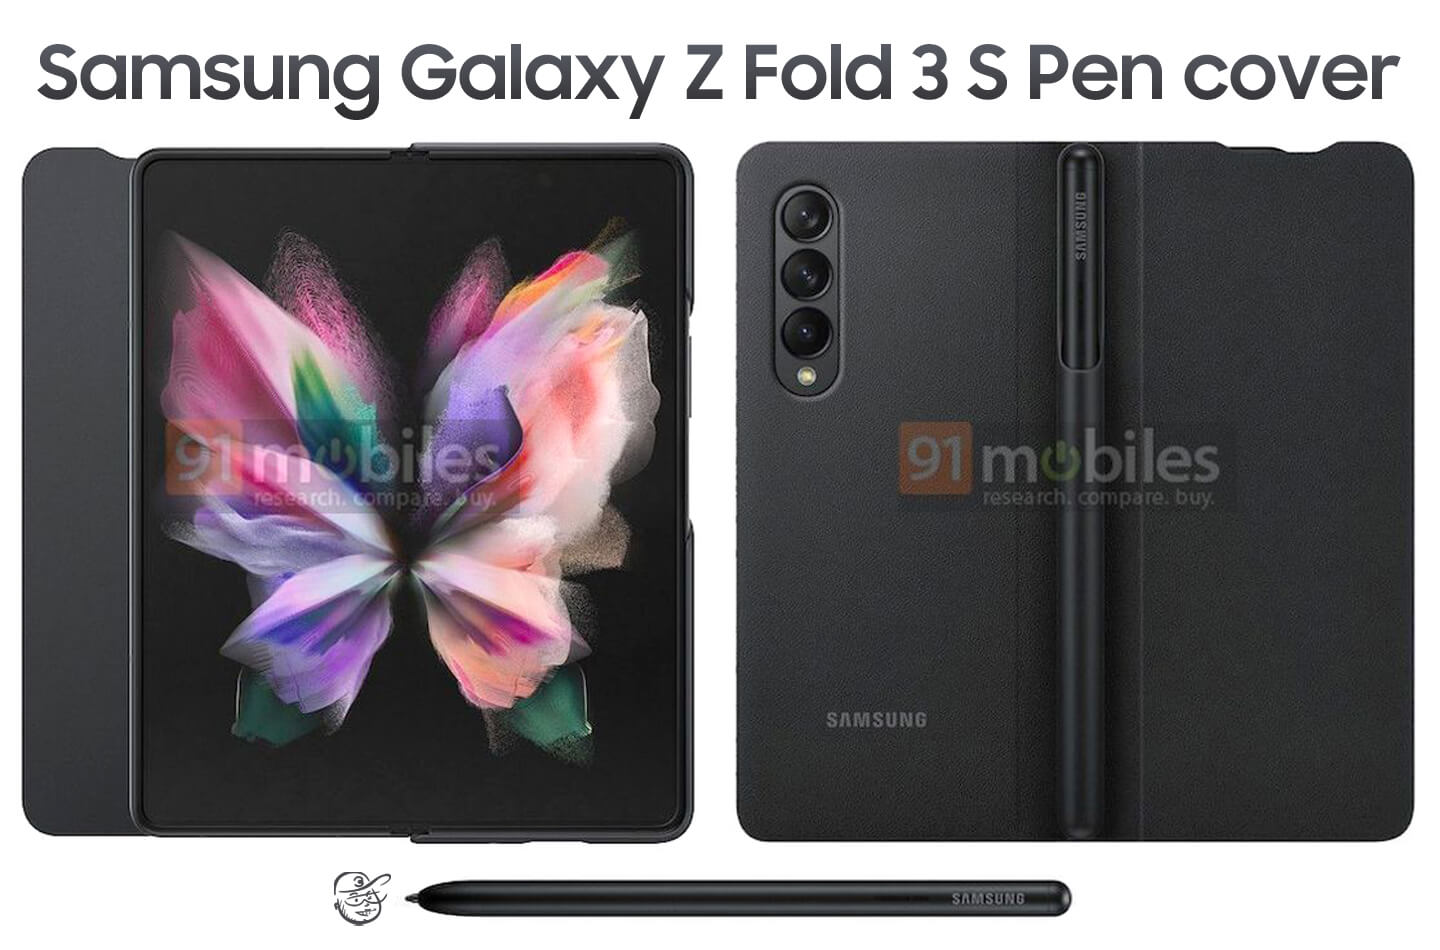 Samsung Galaxy Z Fold 3 Flip Cover for S Pen ~ World Today News